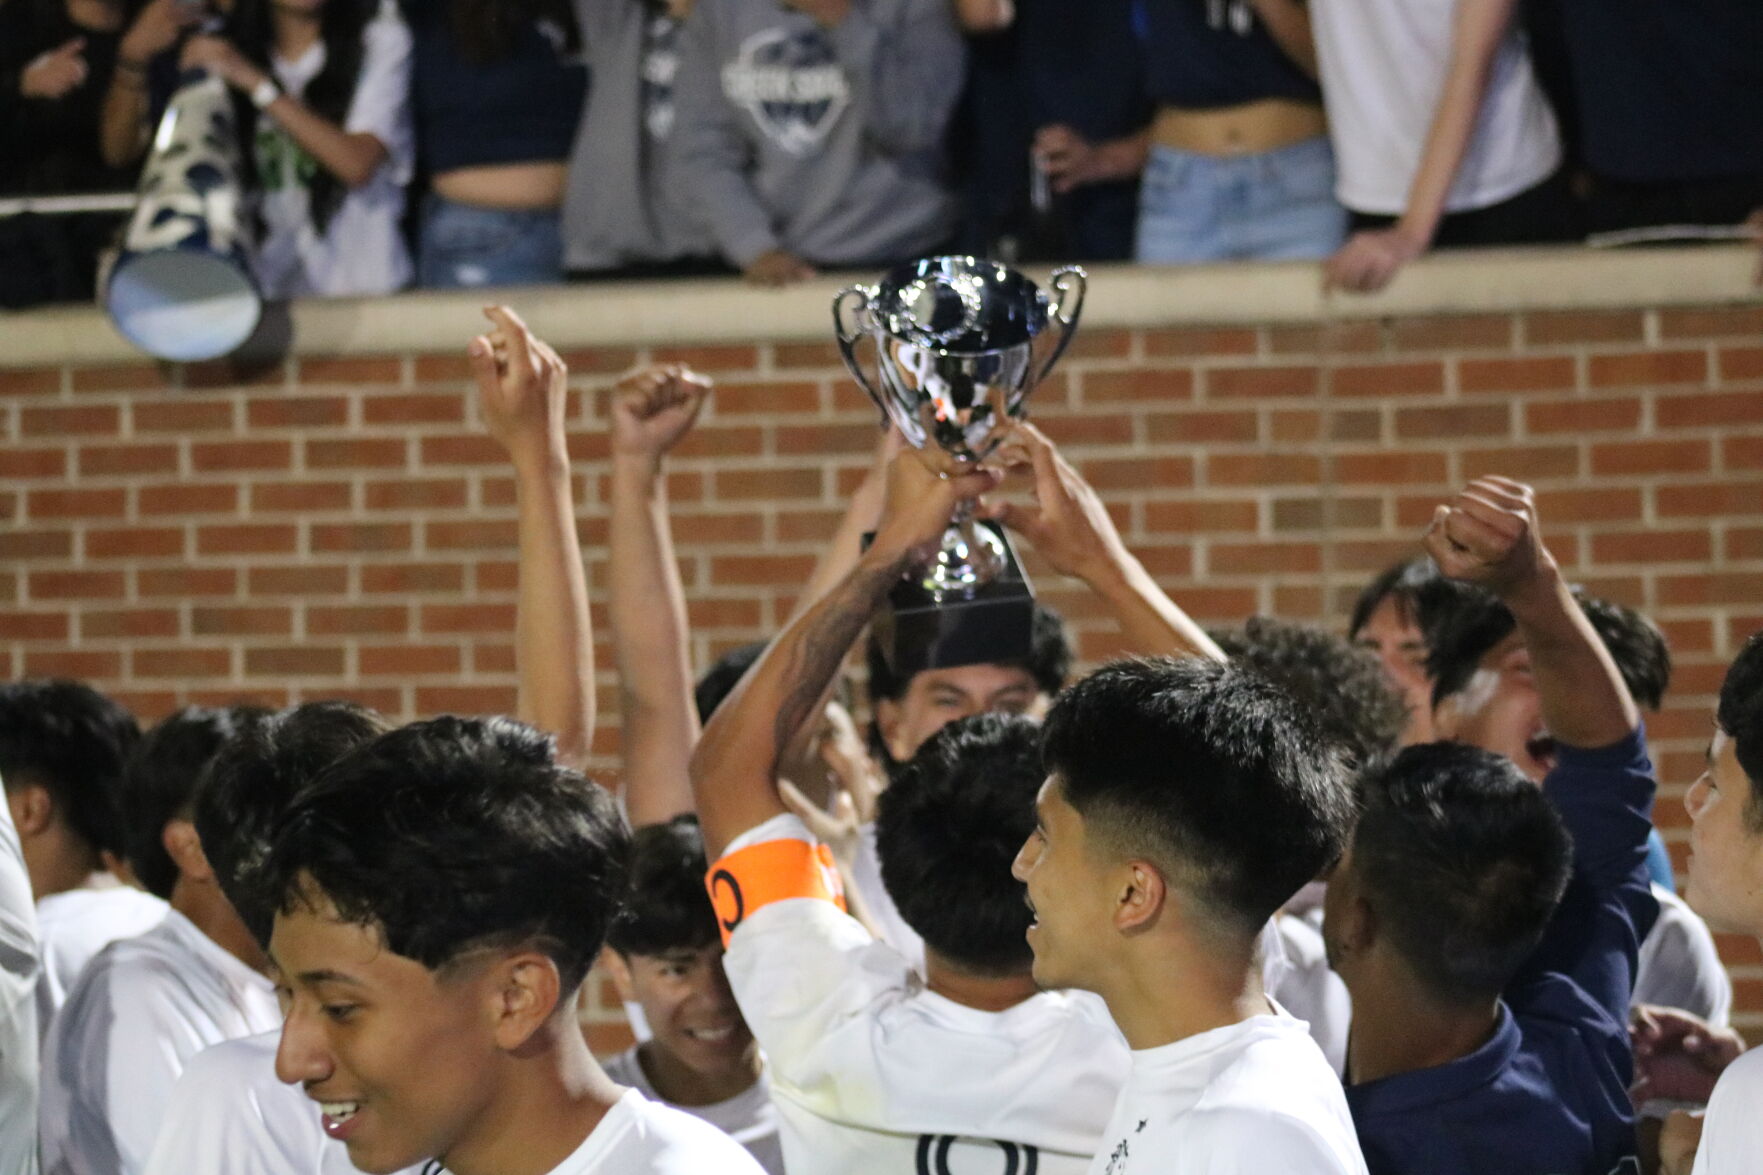 Soccer Playoffs: Dalton and Surrounding Schools Chase State Titles in Georgia